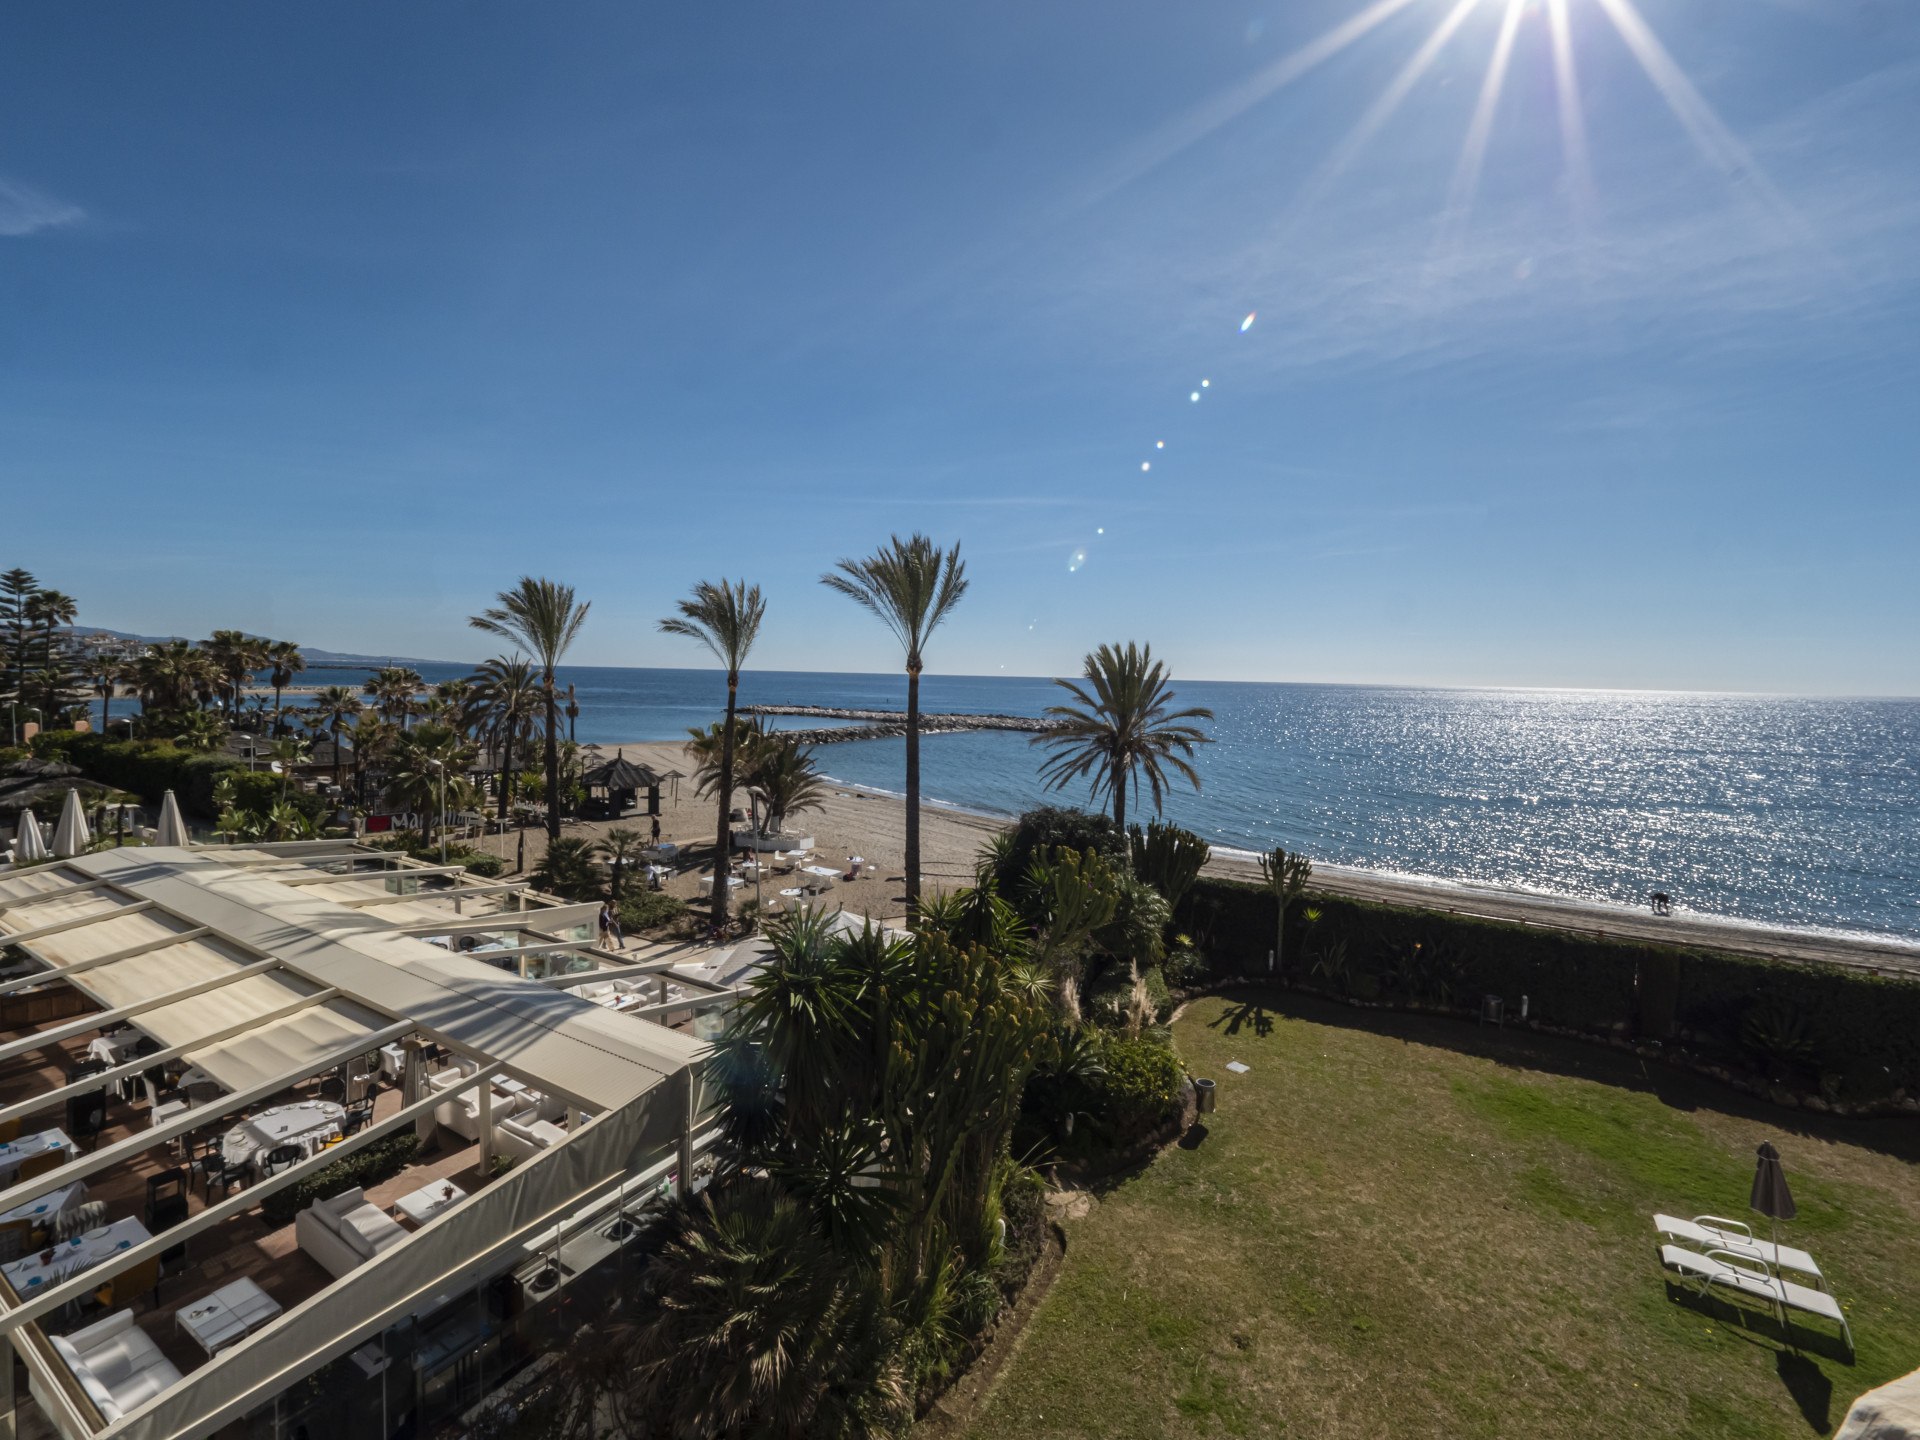 Front line beach apartment with direct views to the beach and sea, walking distance to Puerto Banus